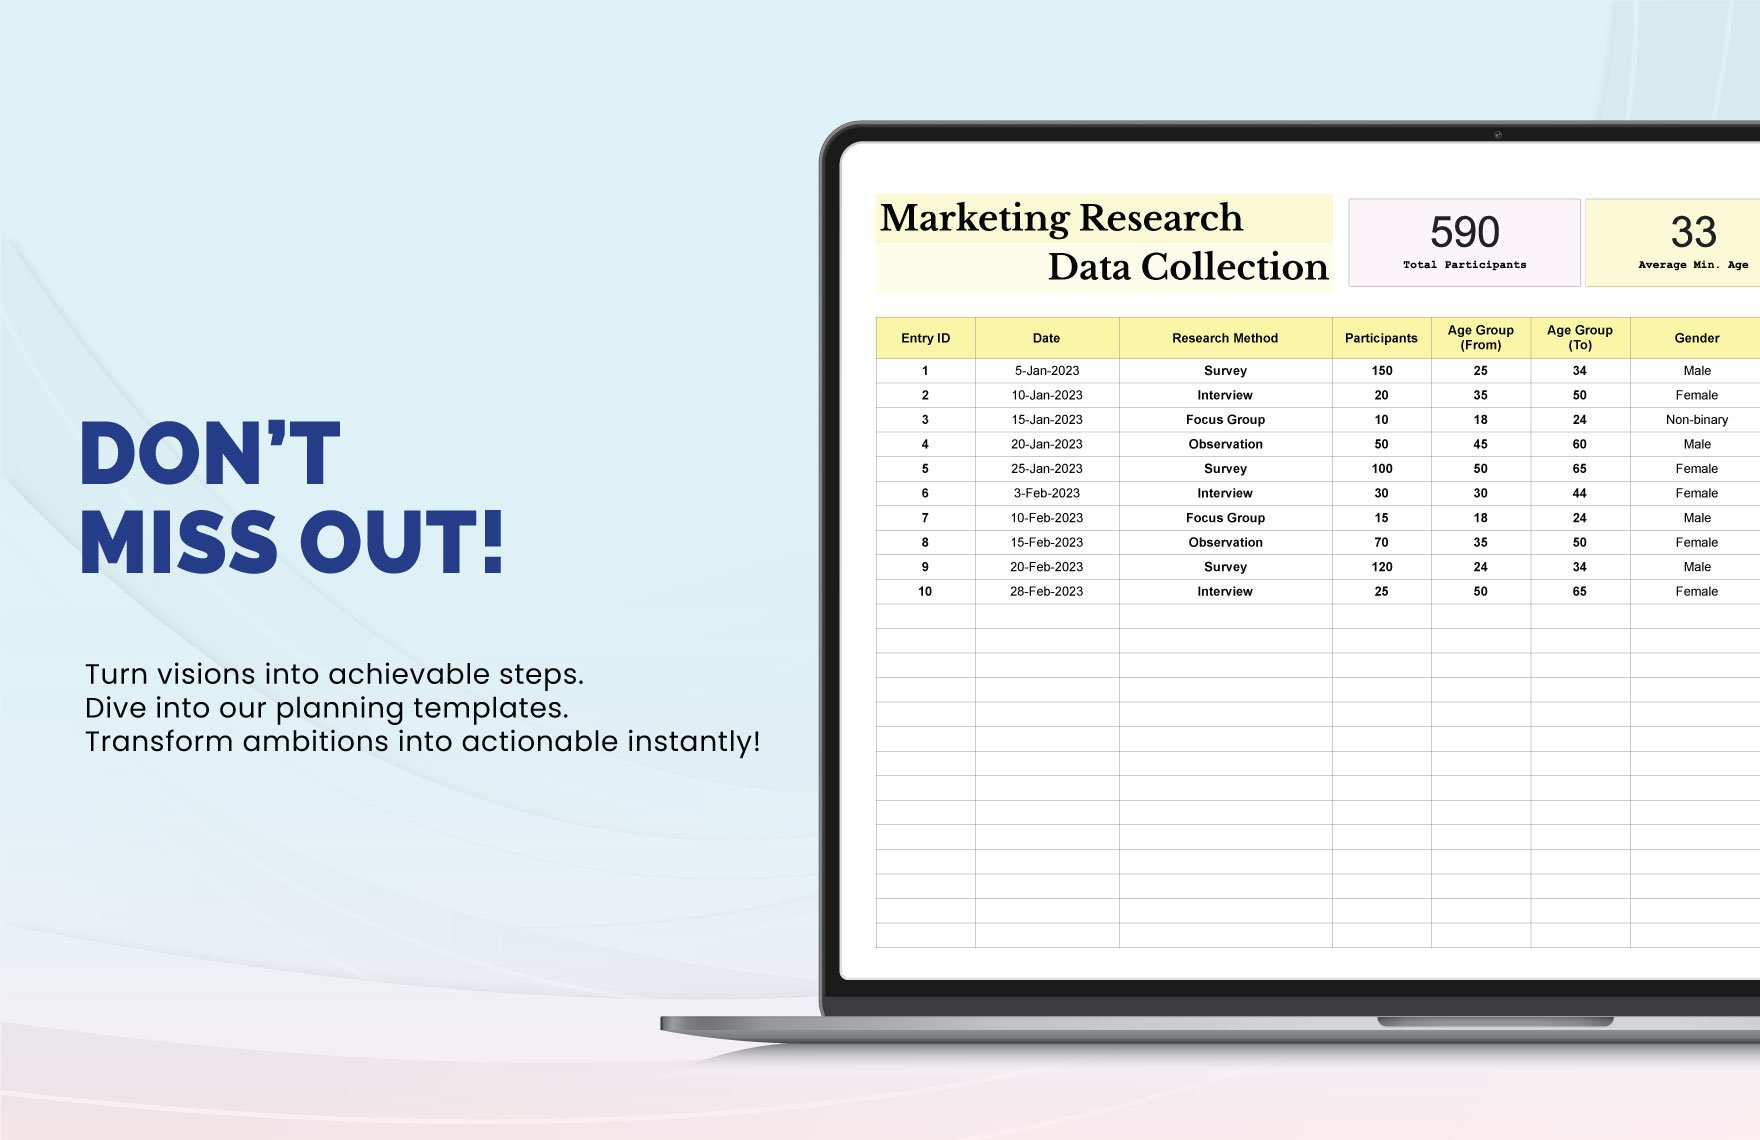 Marketing Research Data Collection Template